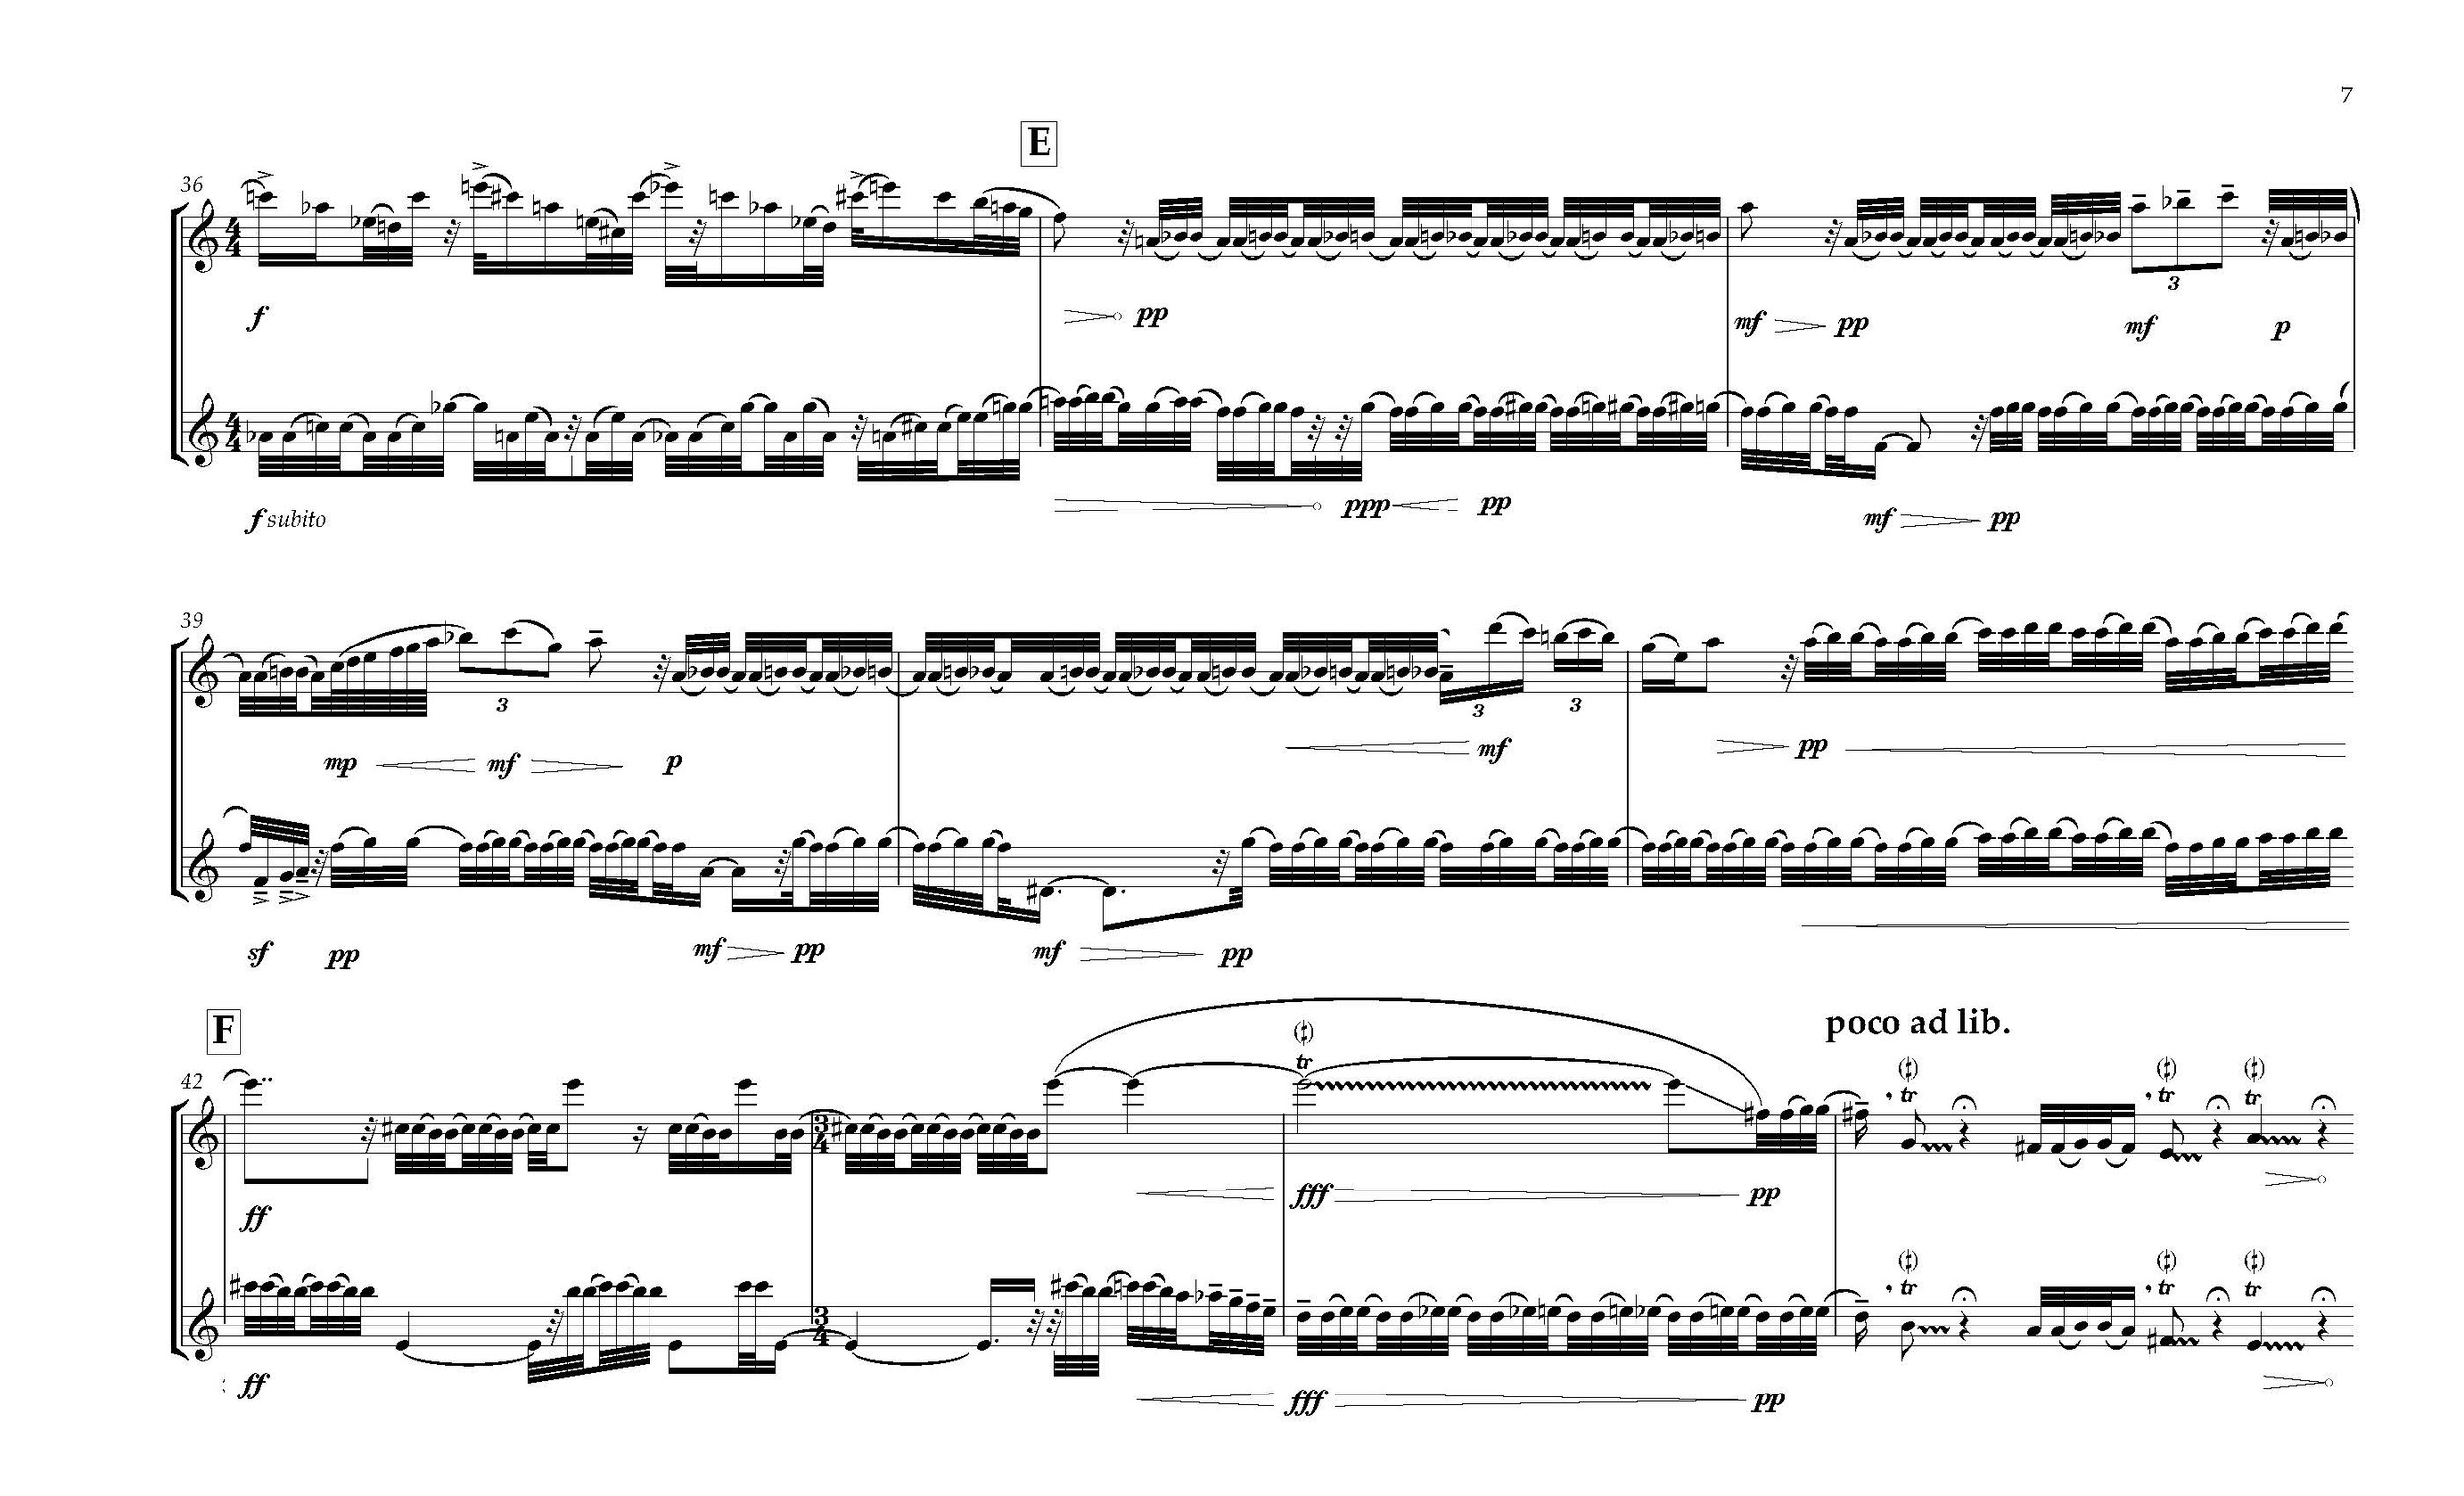 One Final Gyre - Complete Score_Page_15.jpg